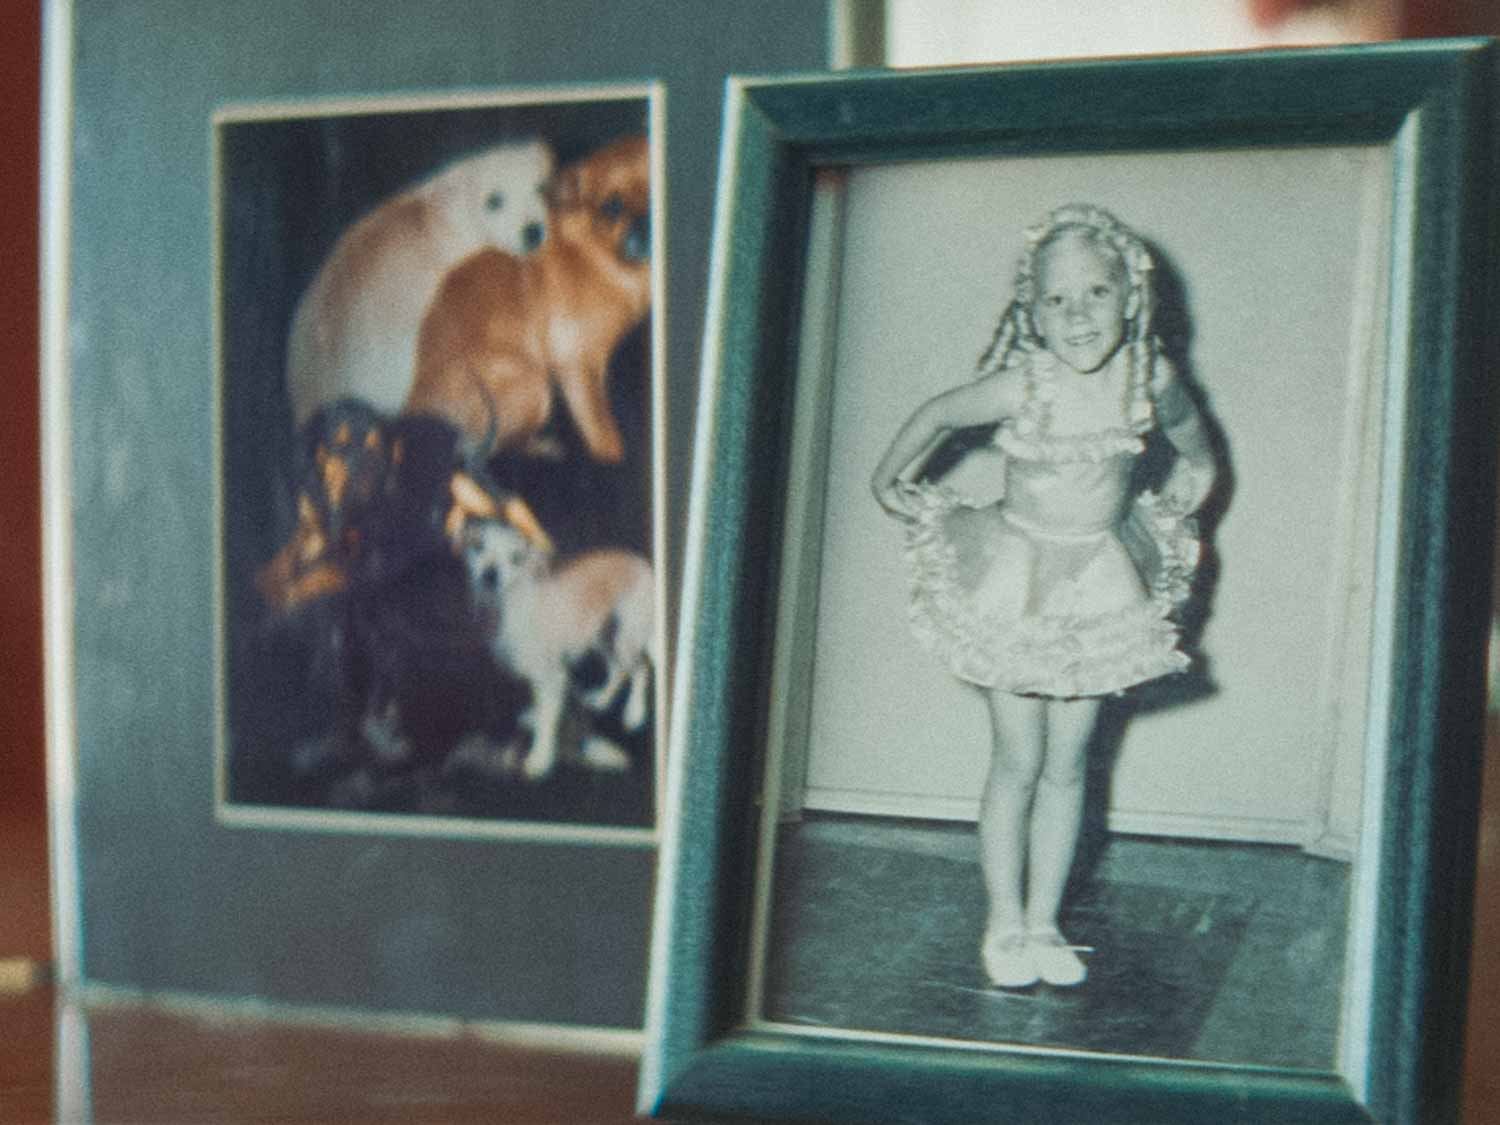 Framed photo of a young girl in ballet shoes and a dance costume